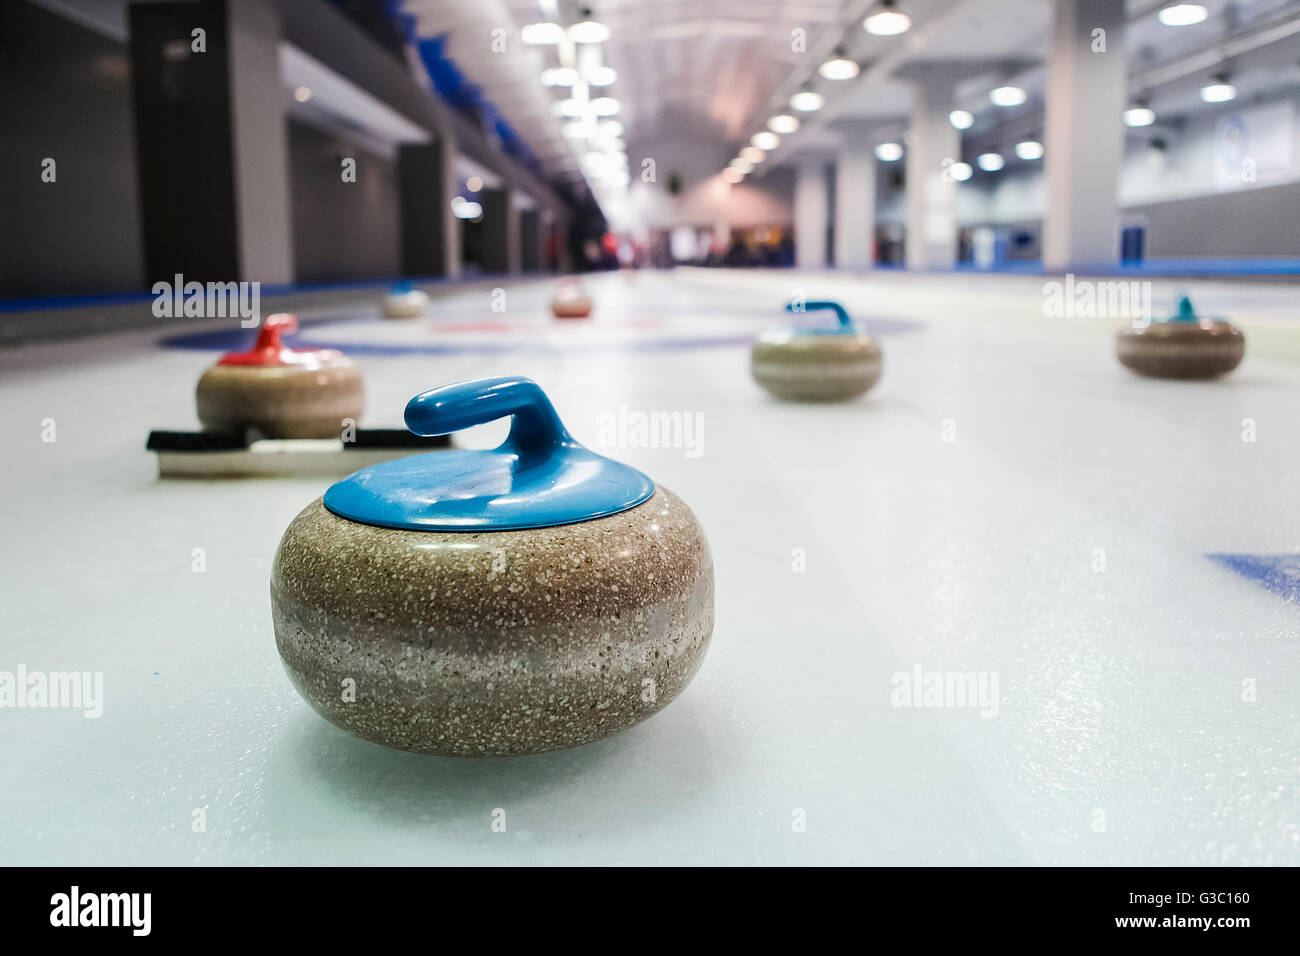 Curling stones lined up on the playing field Stock Photo